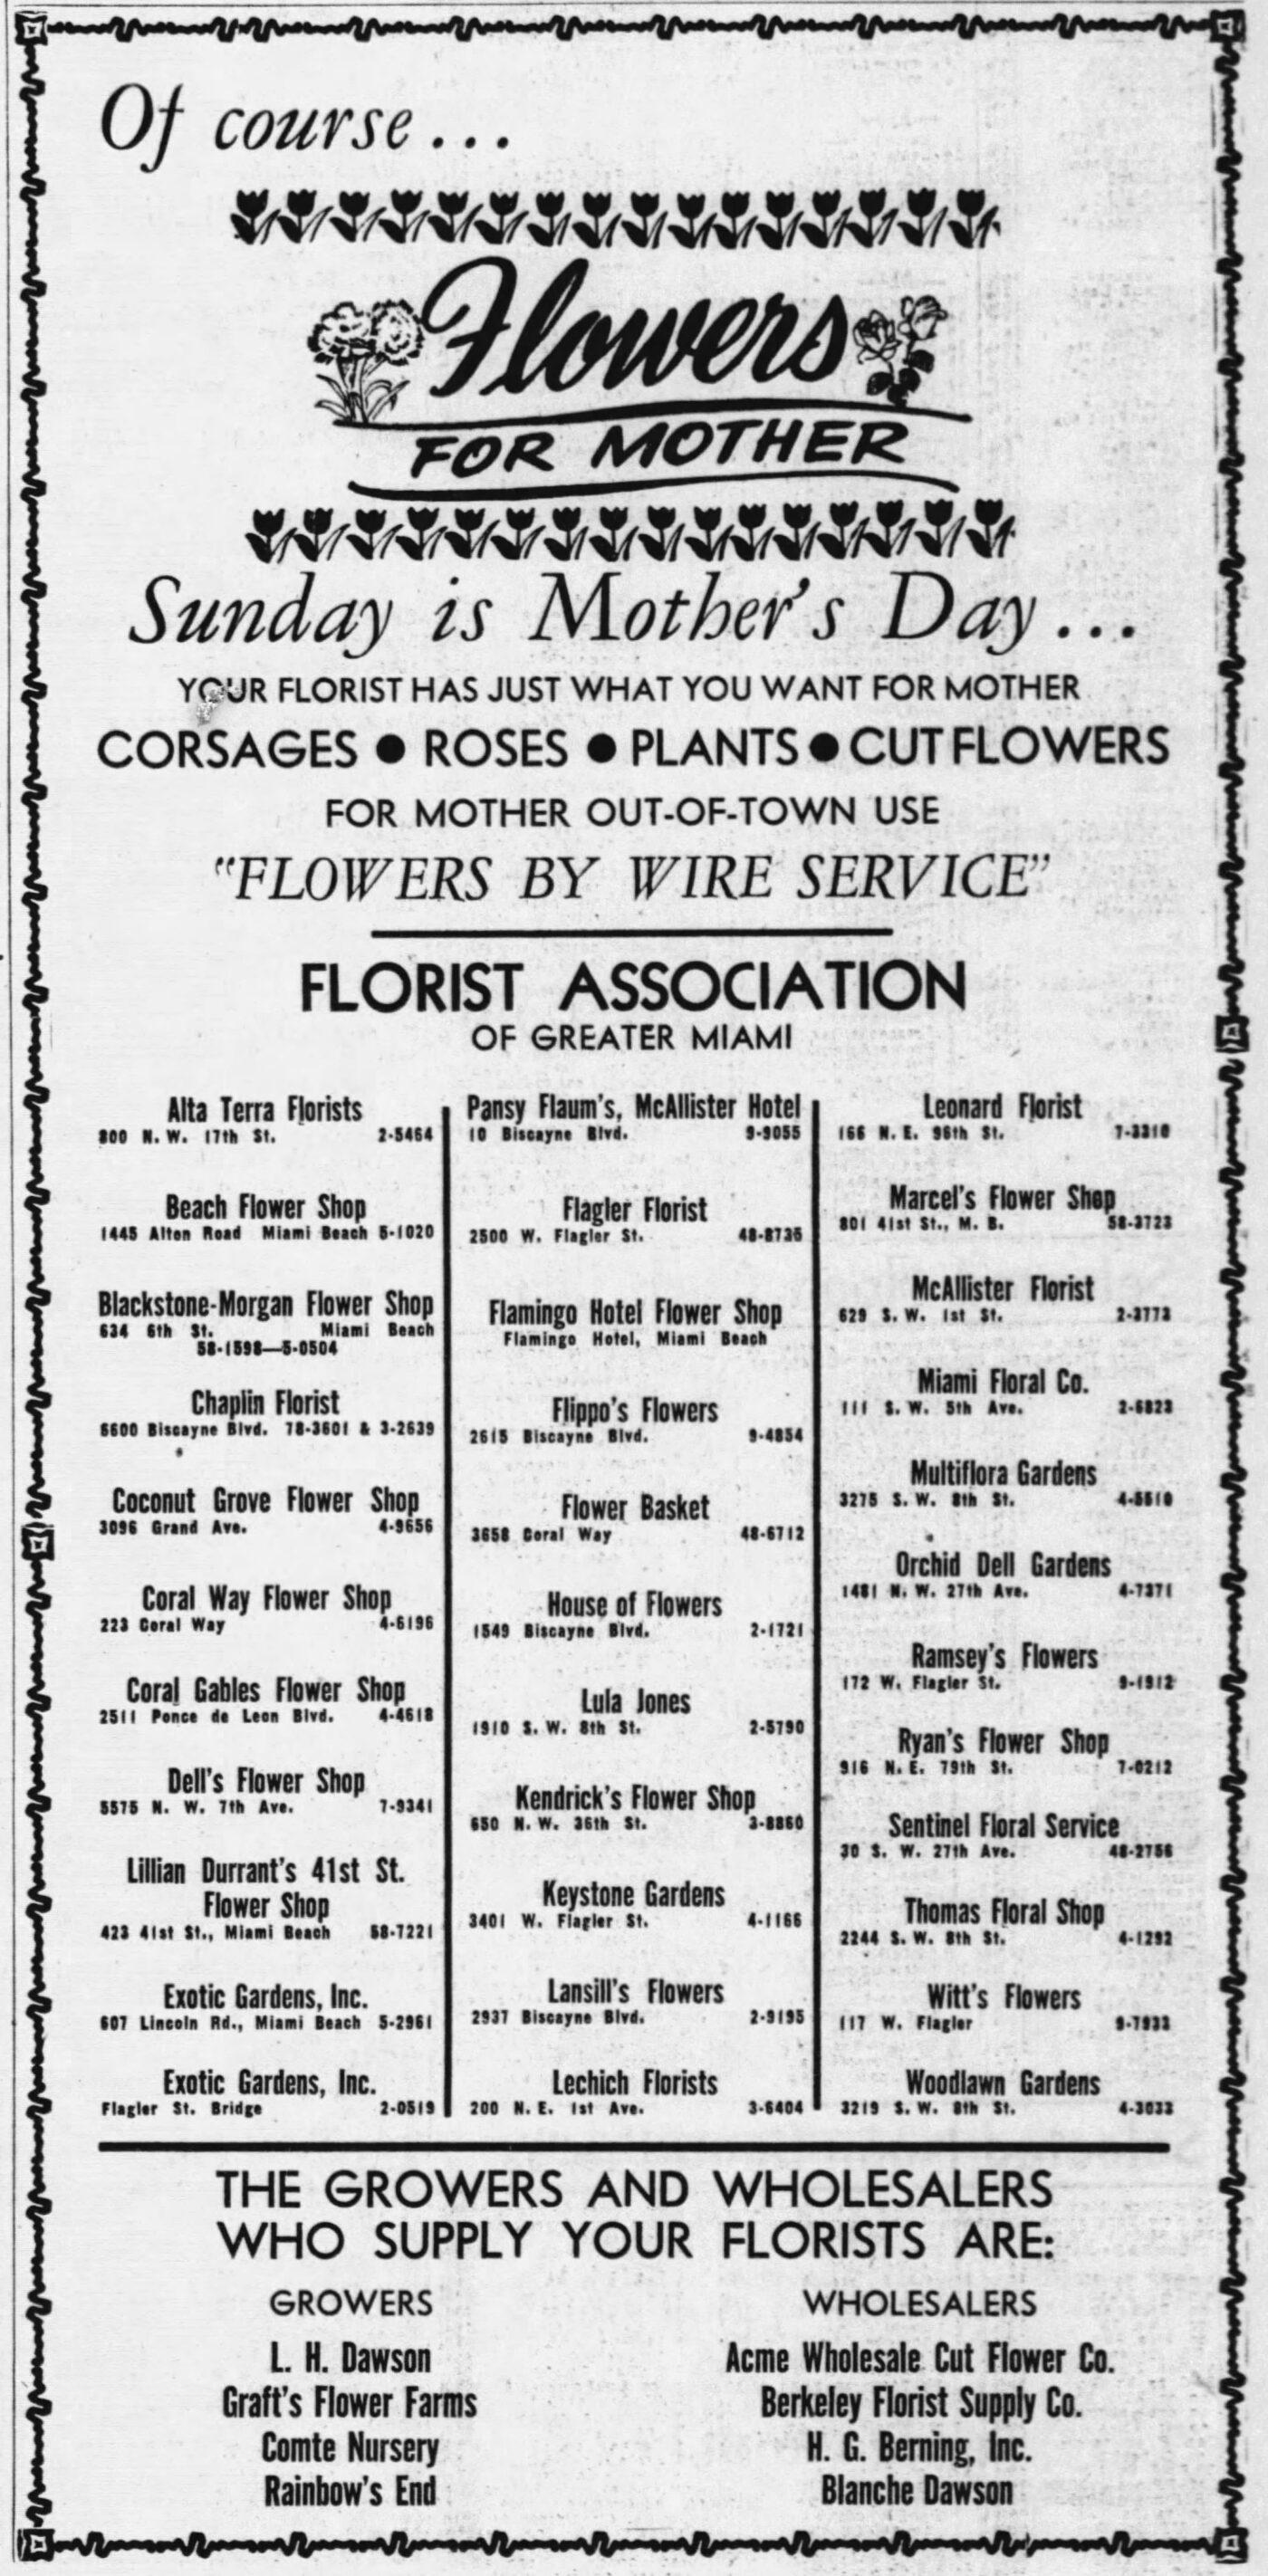 MIAMI DAILY NEWS, ad from May 7, 1948